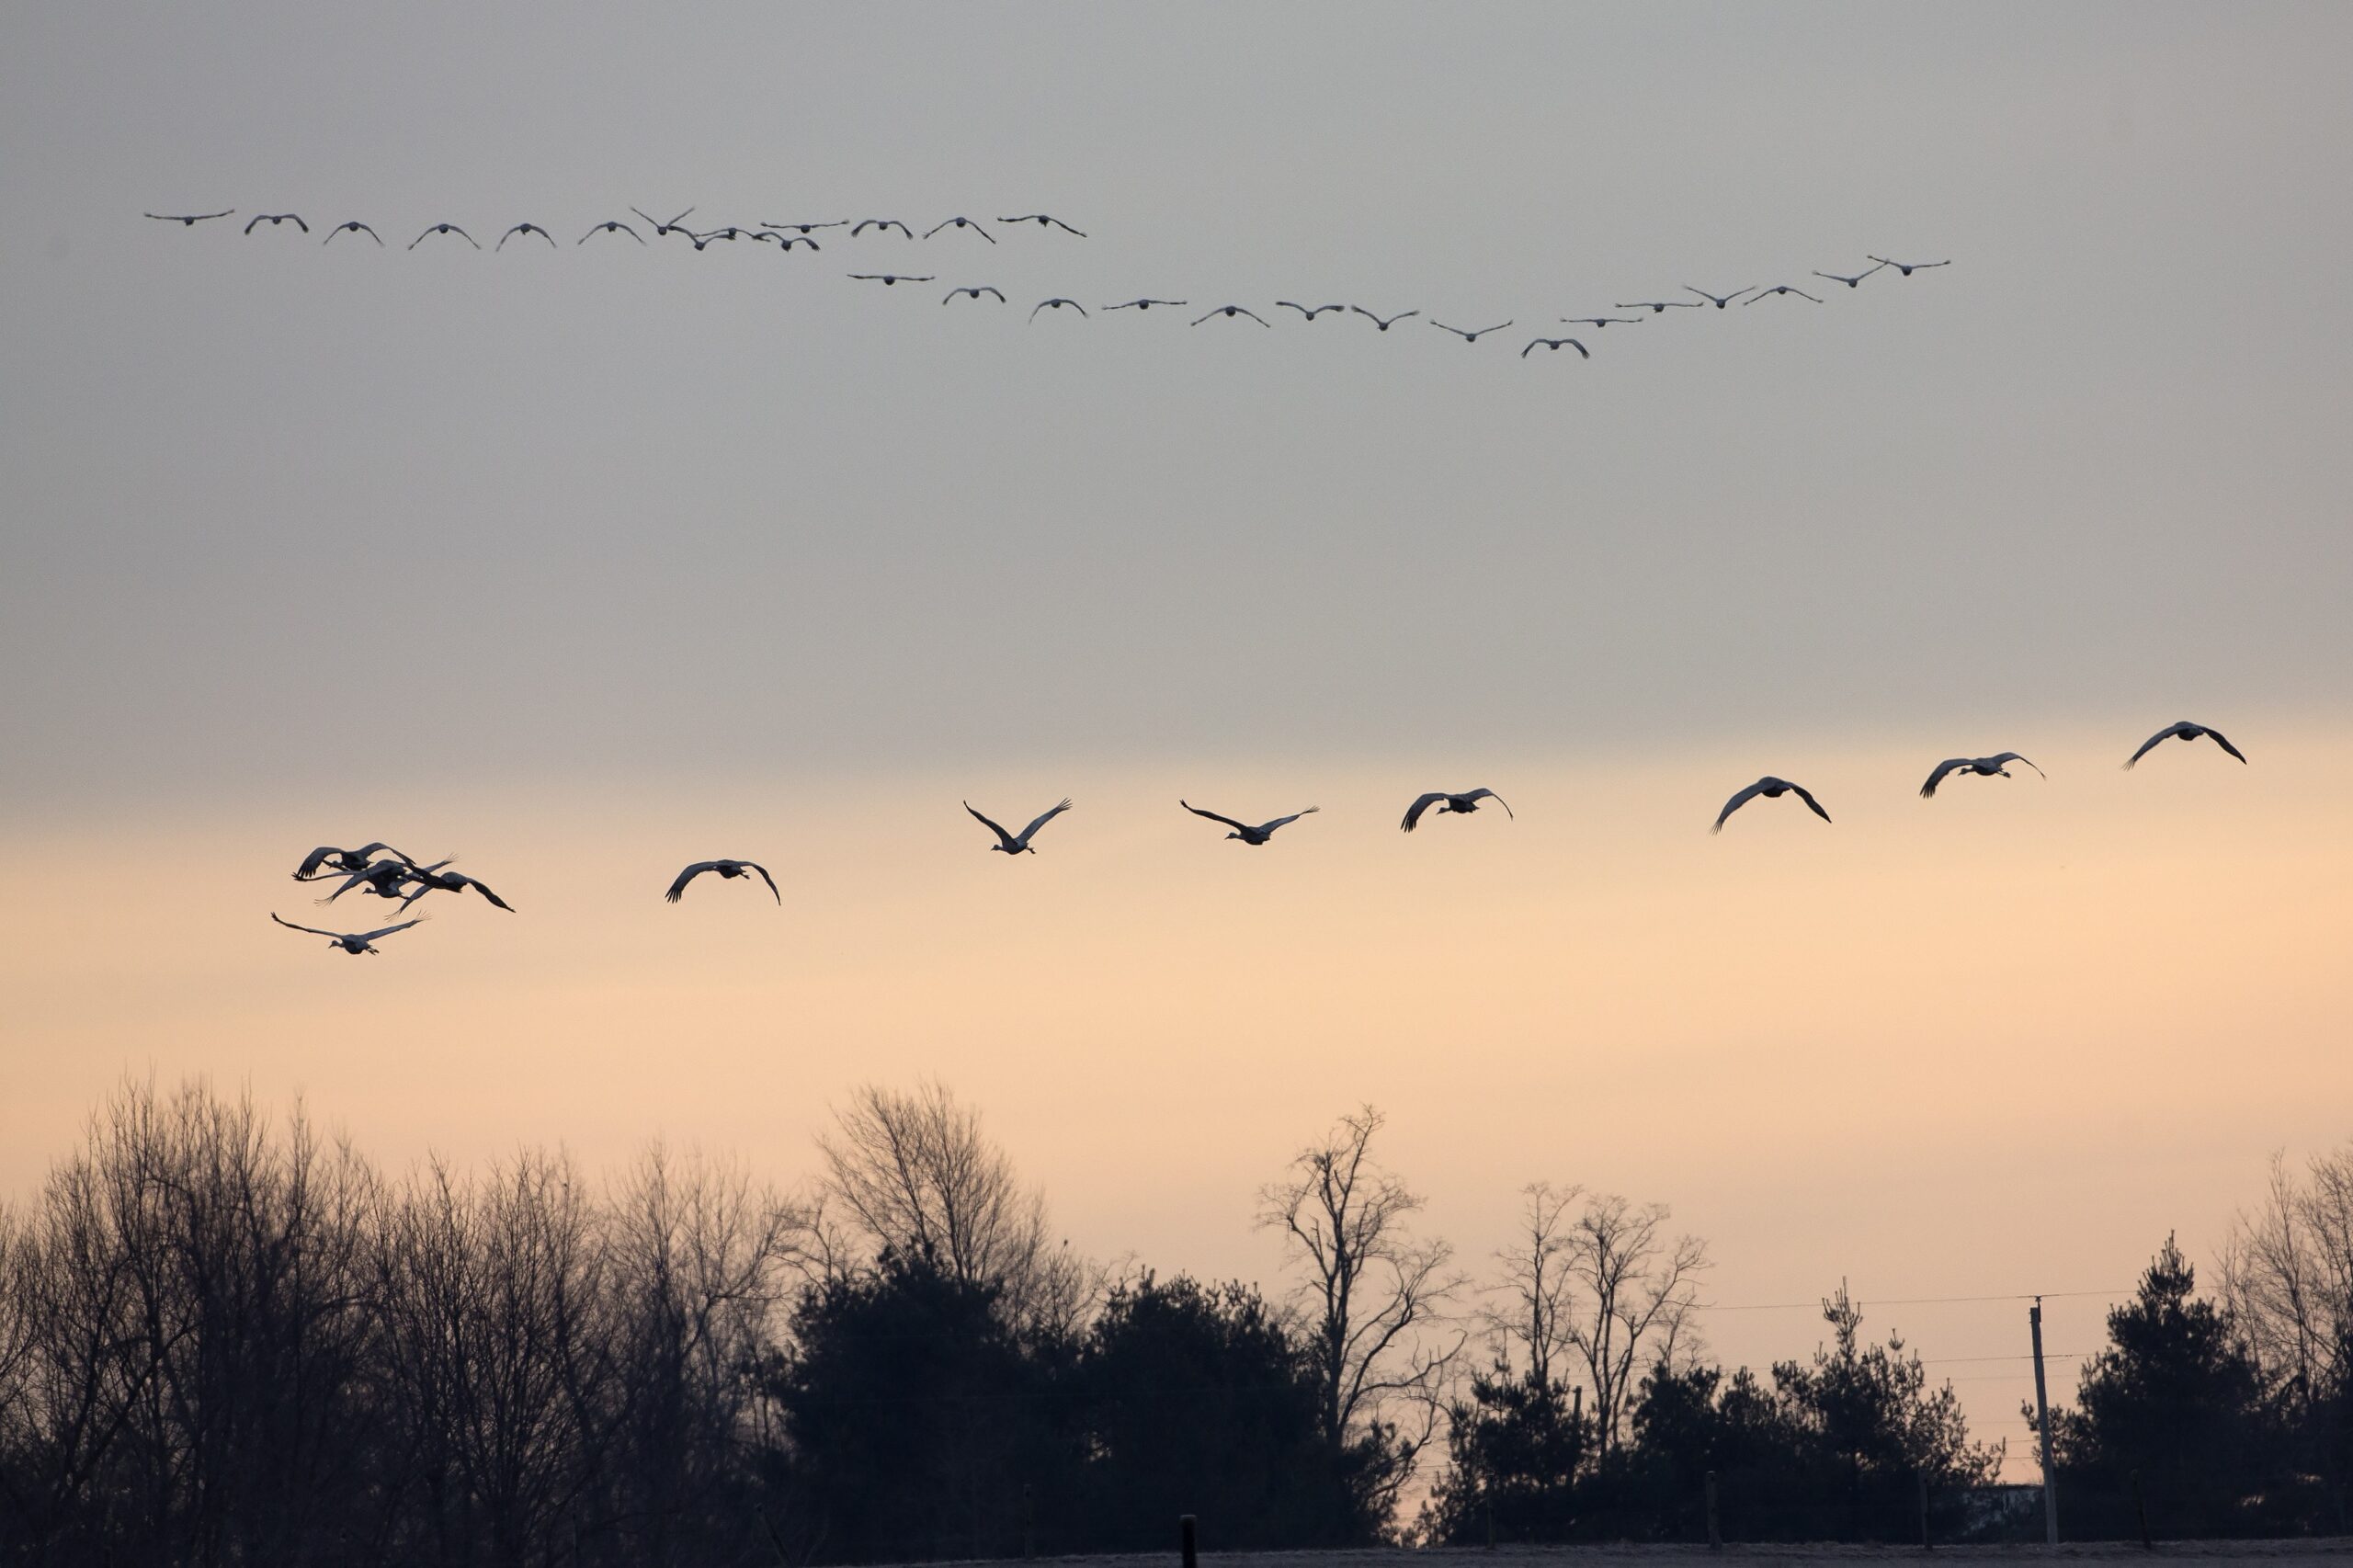 Sandhill cranes leave the area in small groups while migrating.